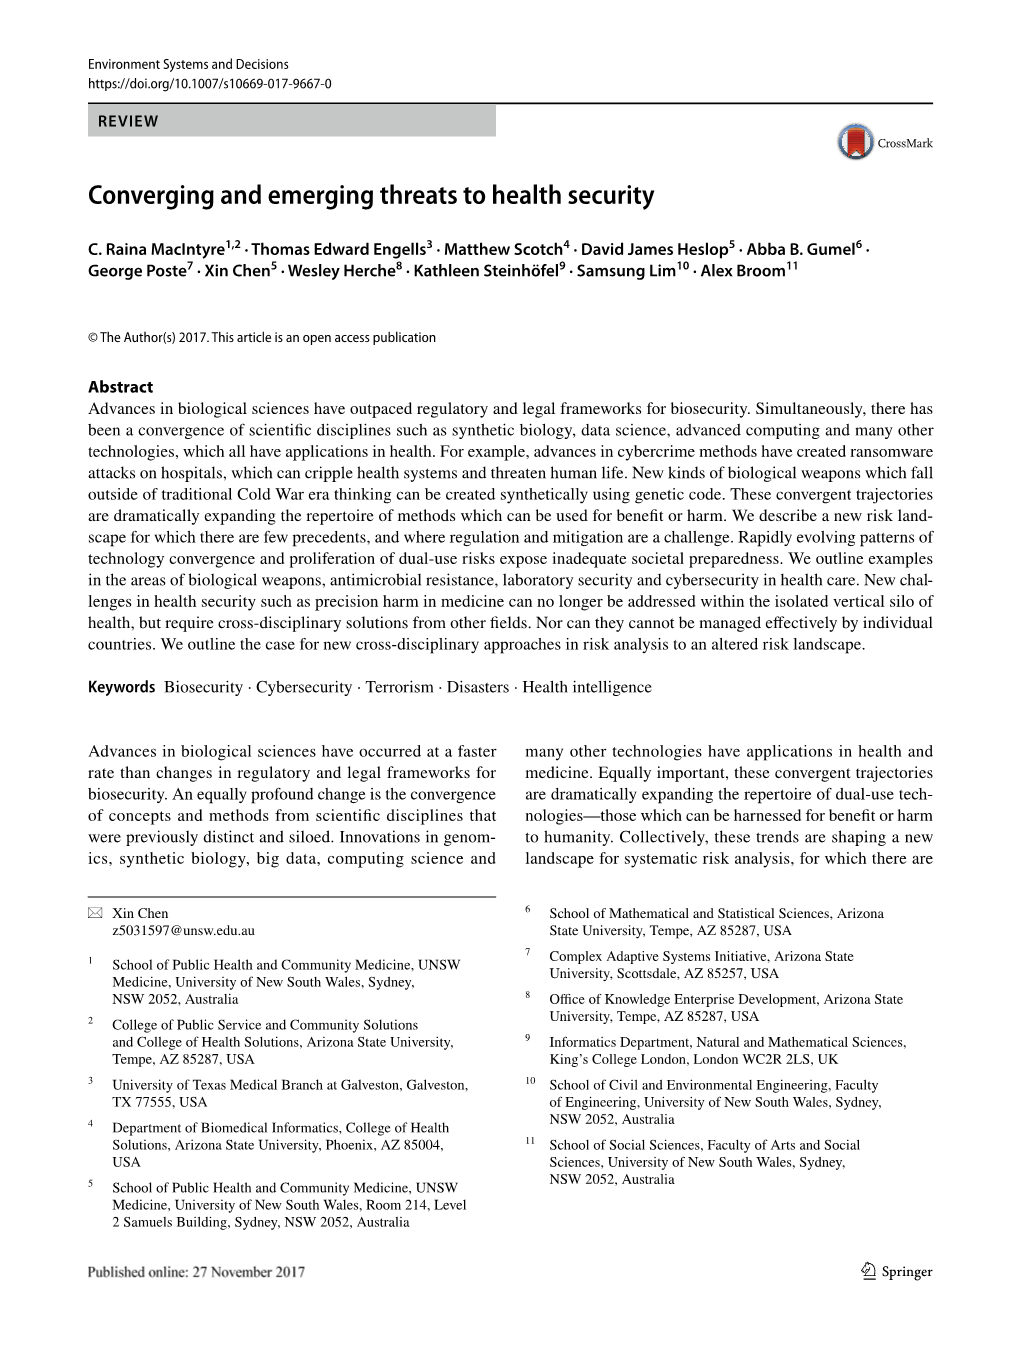 Converging and Emerging Threats to Health Security